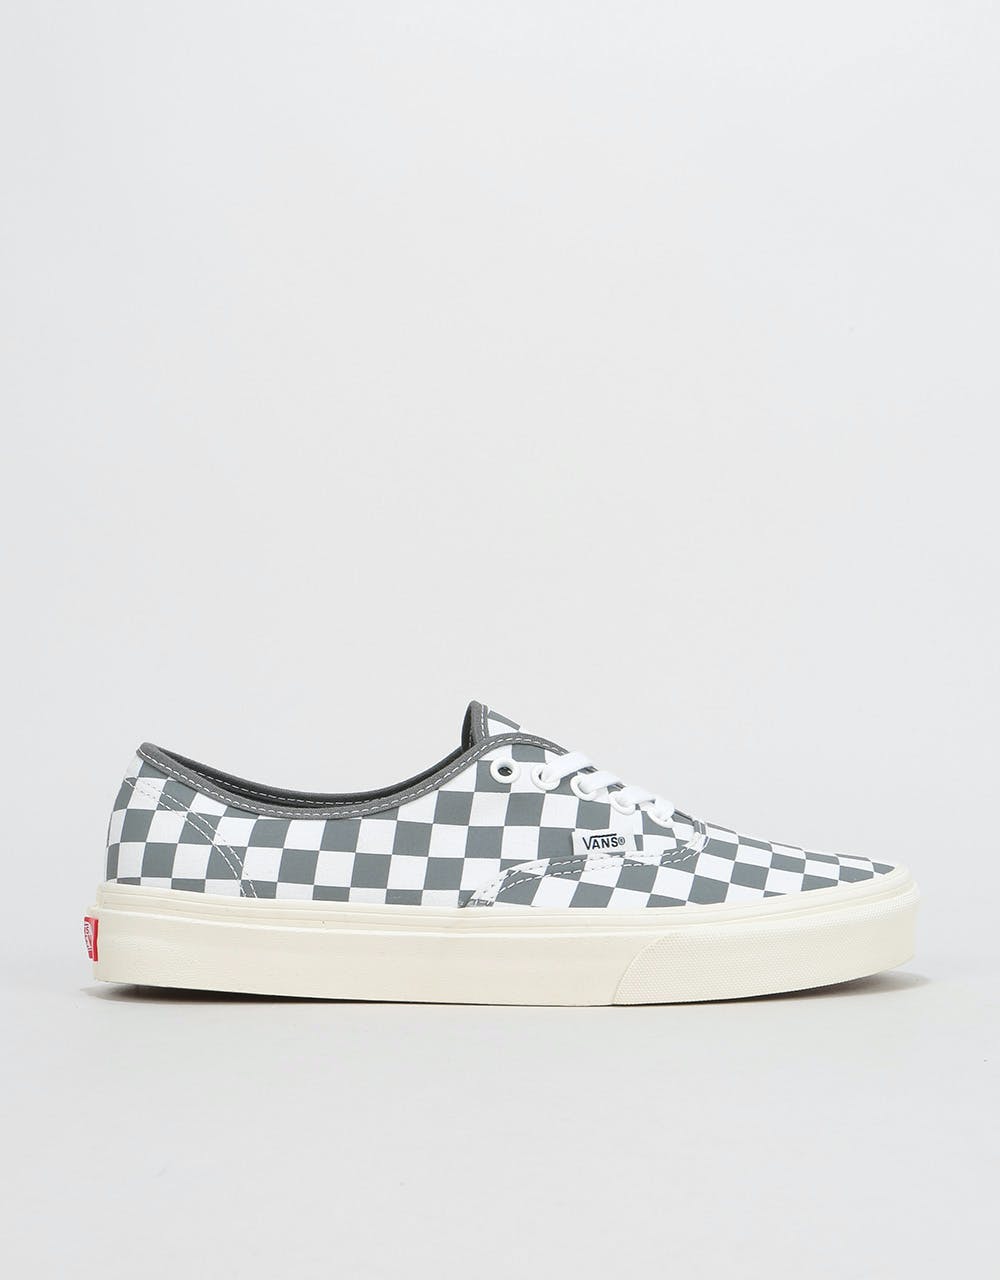 Vans Authentic Skate Shoes - (Checkerboard) Pewter/Marshmallow